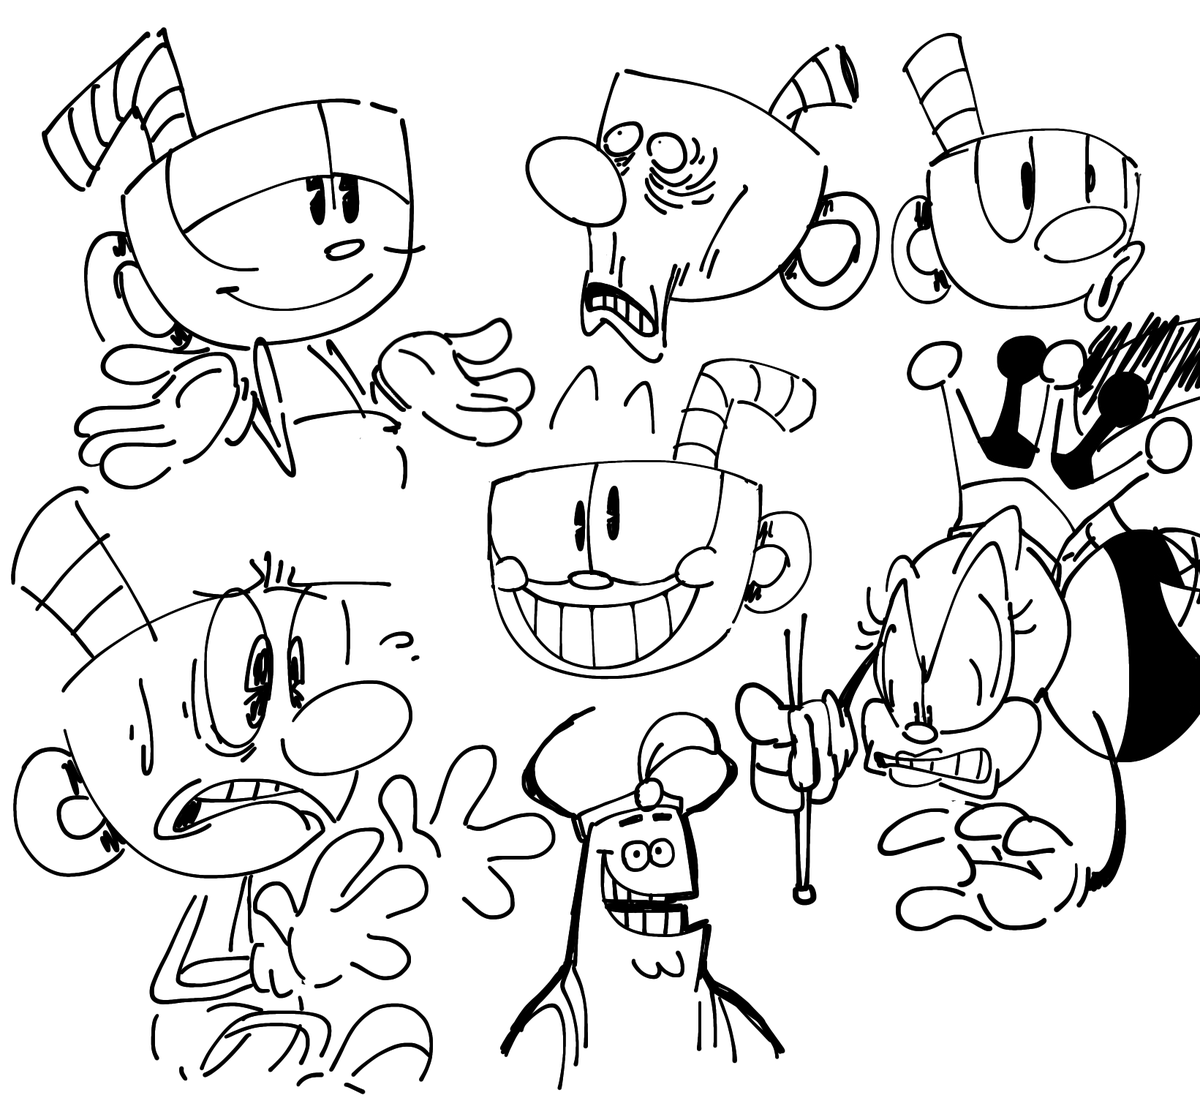 stuff i scribbled tonight to try and put myself to sleep. it did not work 